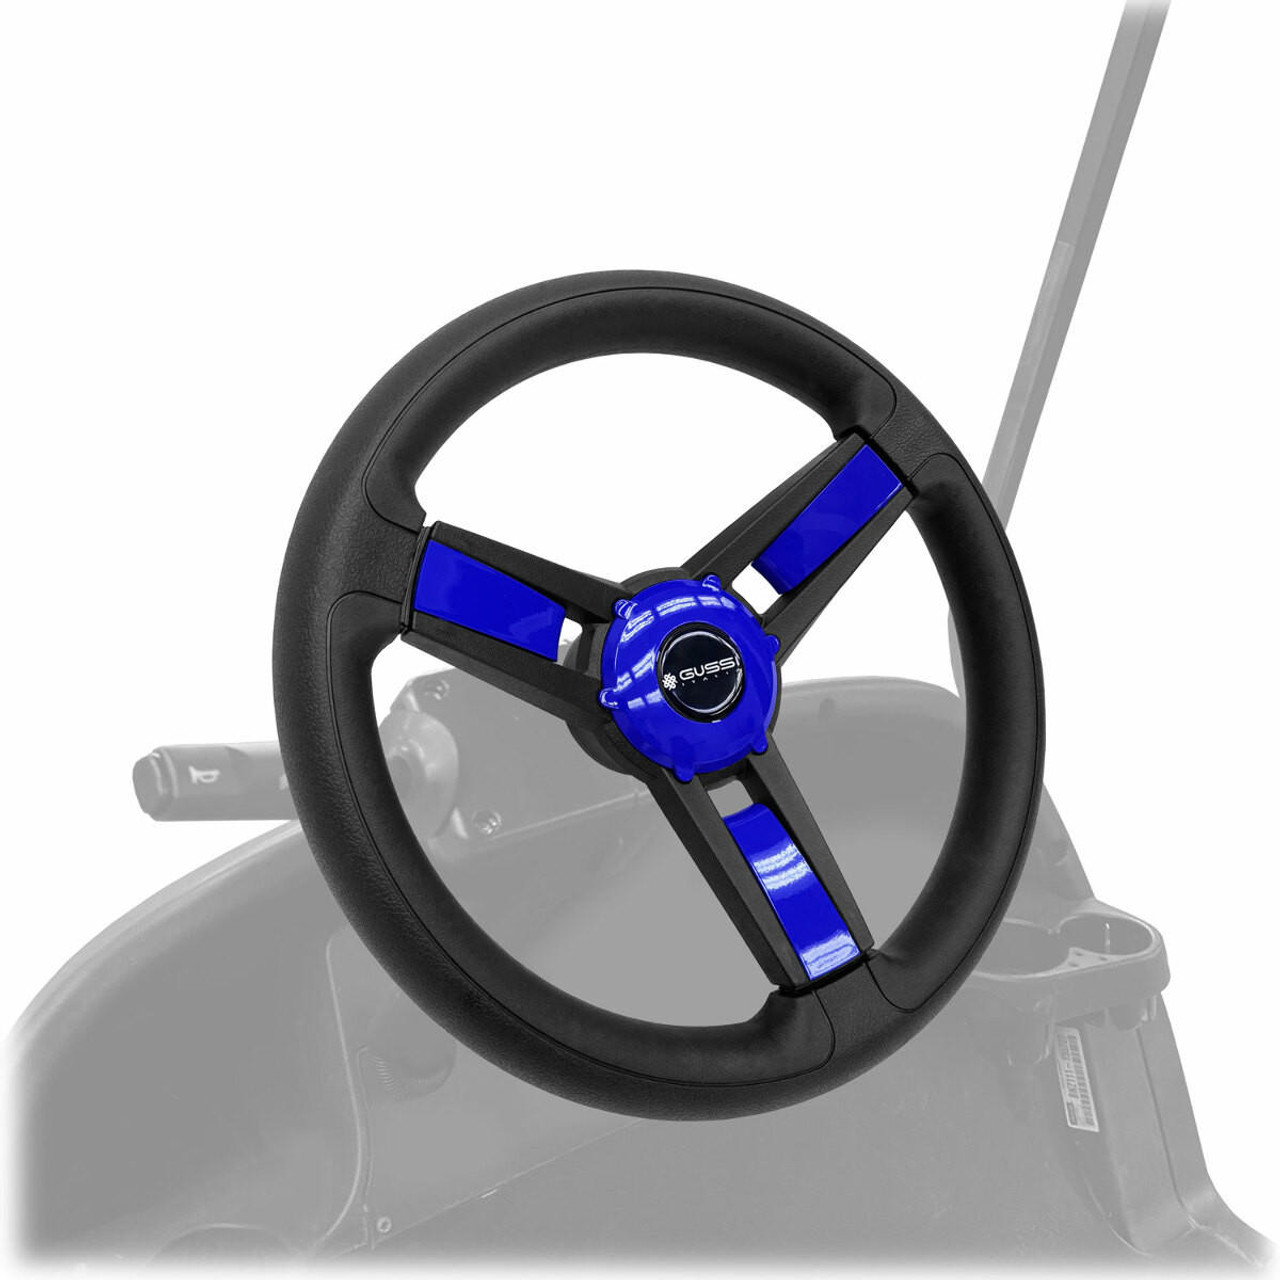 ProFormX 14" Gussi Italia Giazza Steering Wheel with Adapter & Blue Insert Kit - Fits Club Car Precedent, Onward, Tempo 